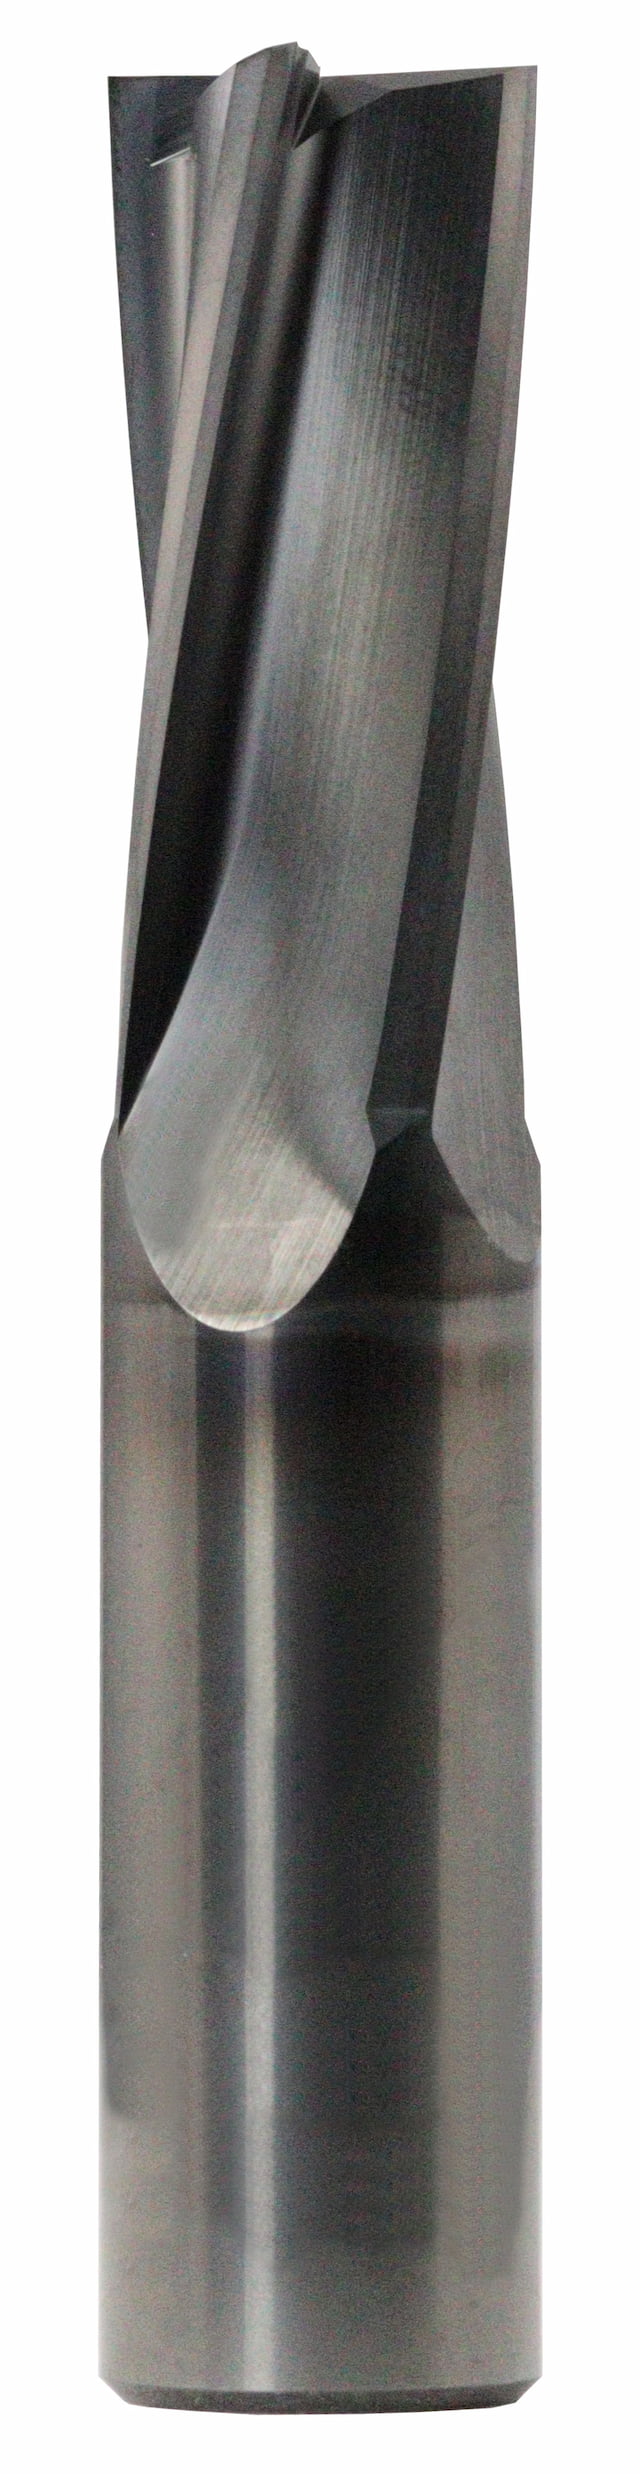 10.00mm Dia, 4 Flute, Square End End Mill - 83061